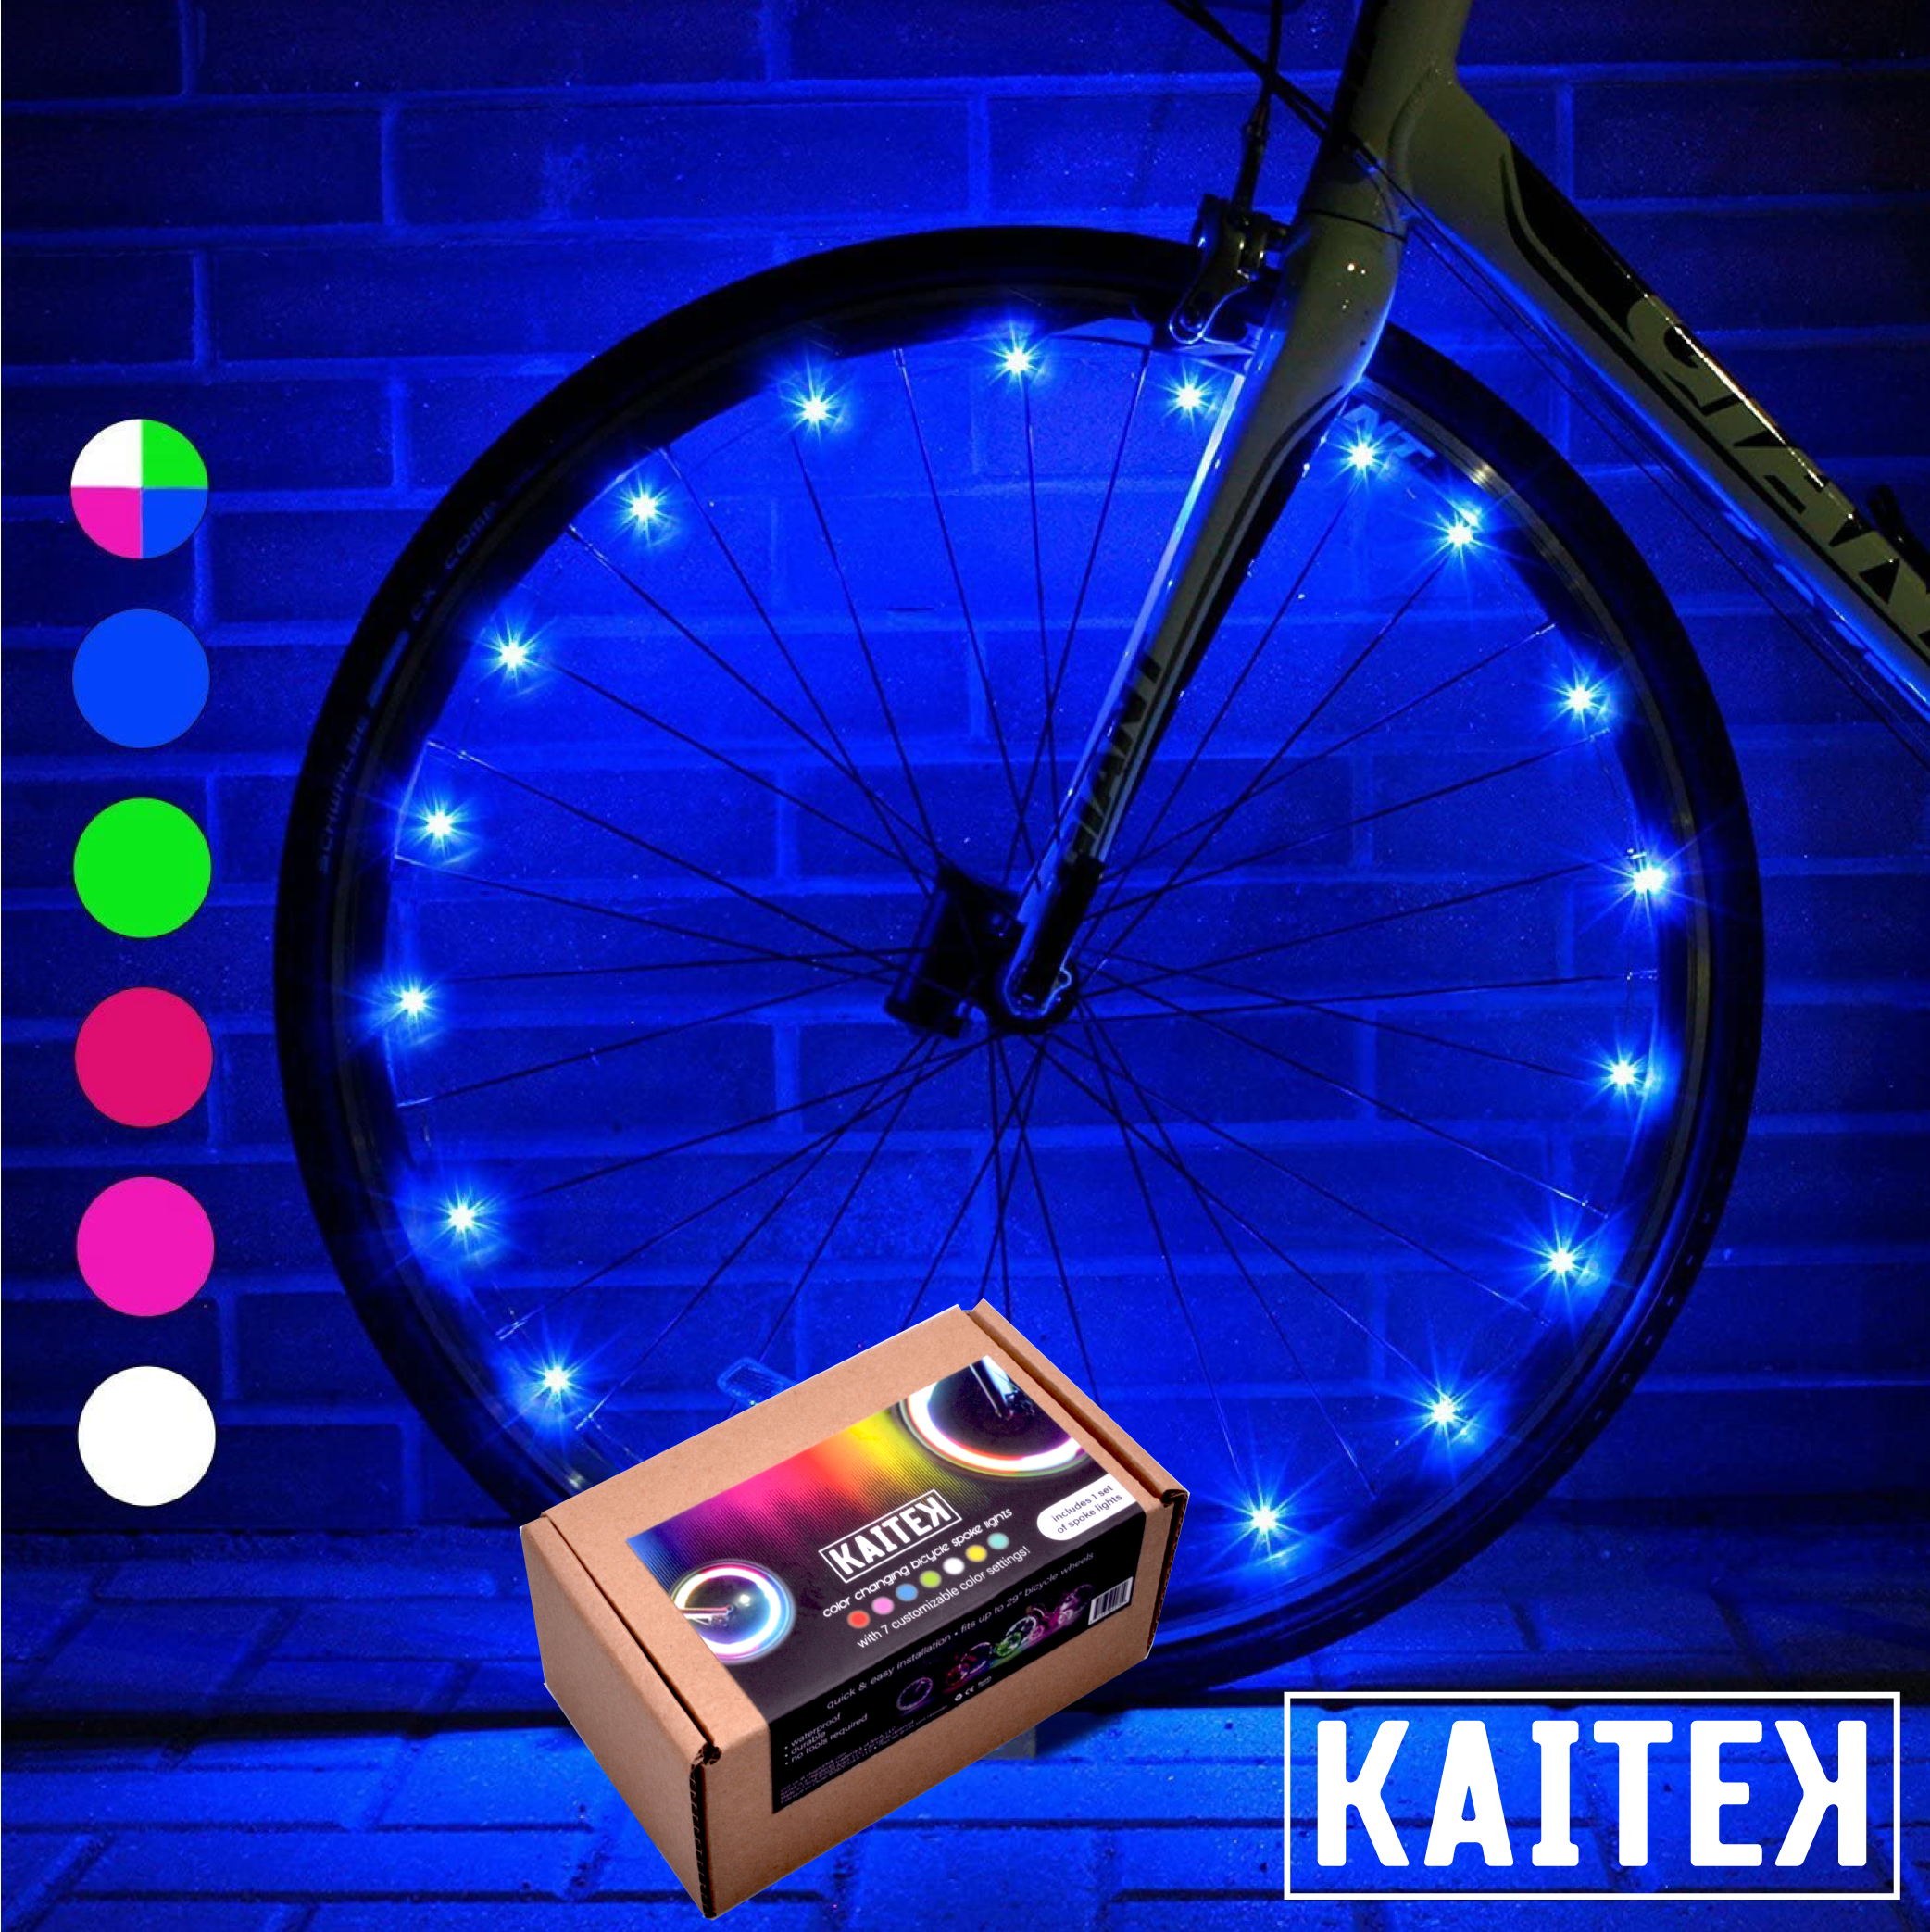 Kaitek LED Bicycle Wheel Accessory Light for 1 Wheel, Color-Changing - image 1 of 7